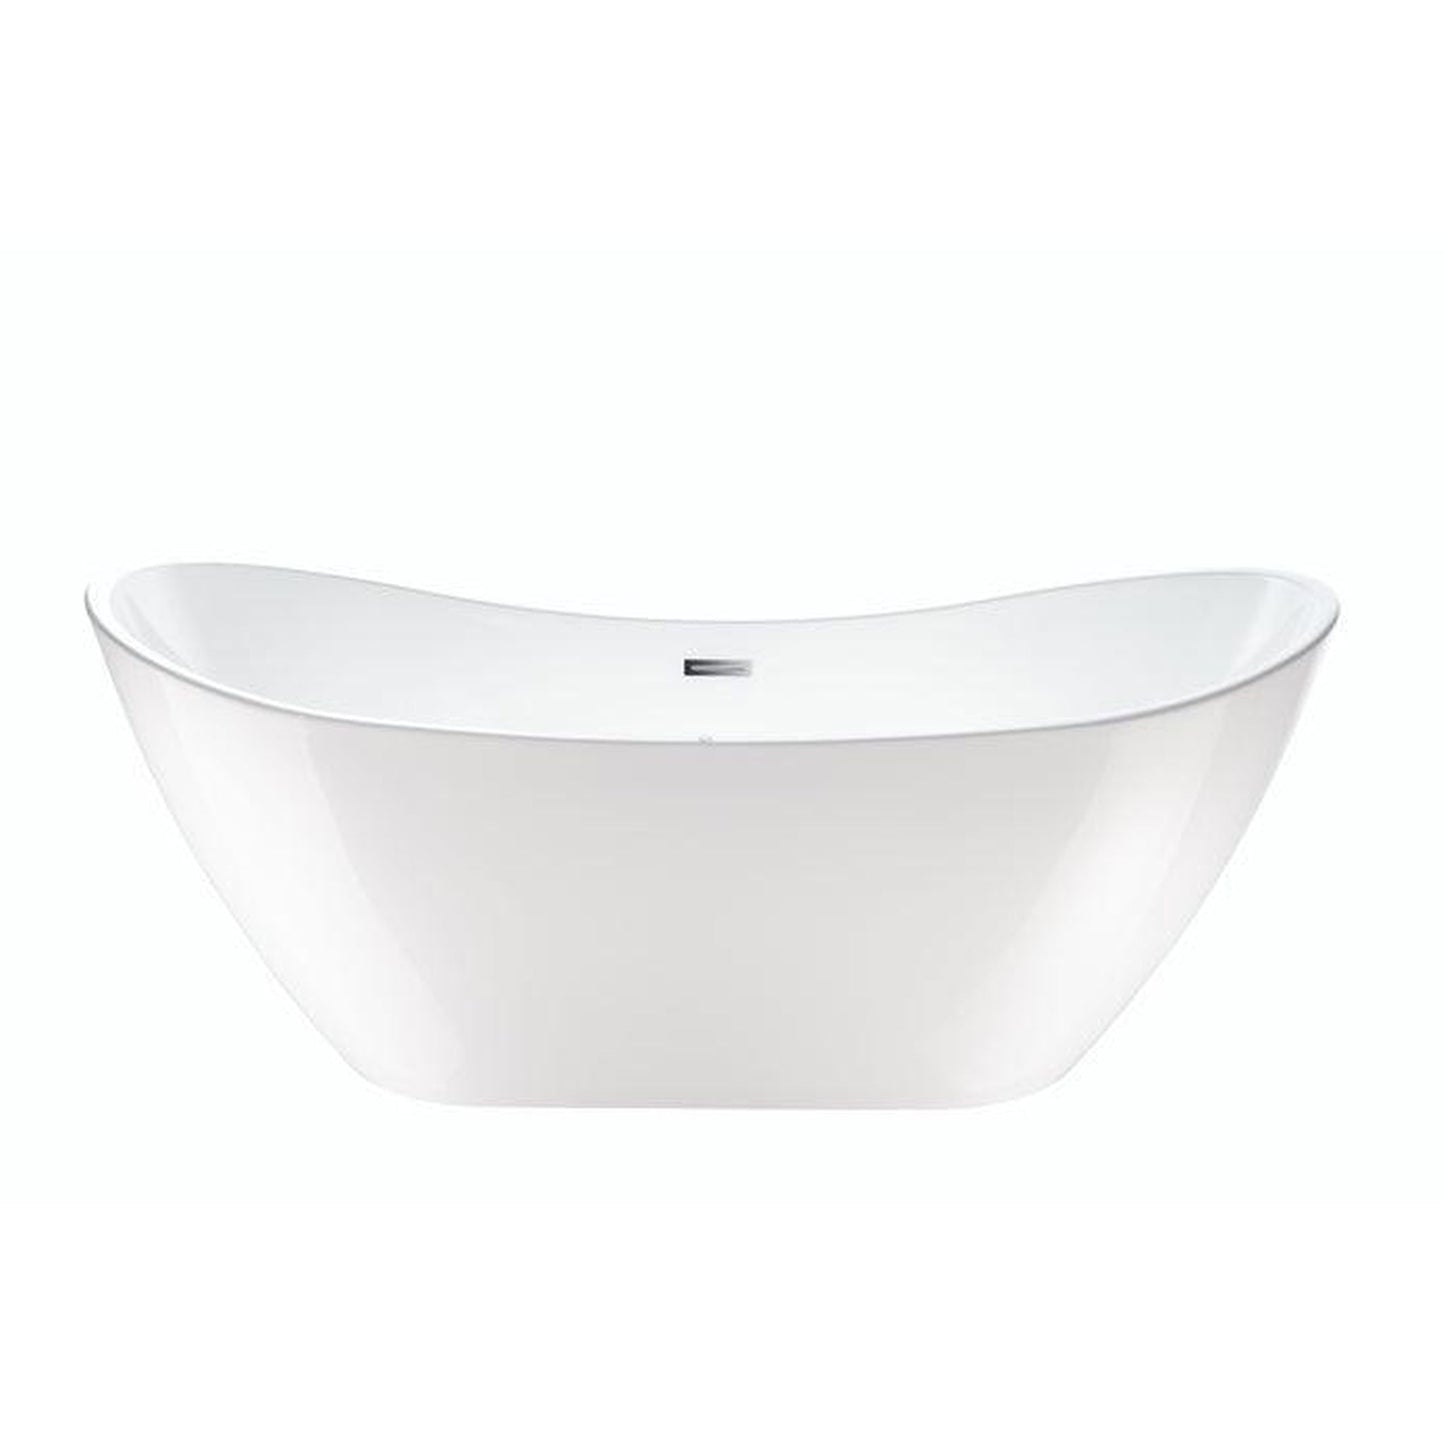 Vanity Art 71" W x 28" H White Acrylic Freestanding Bathtub With Polished Chrome Pop-up Drain, Slotted Overflow and Flexible Drain Hose